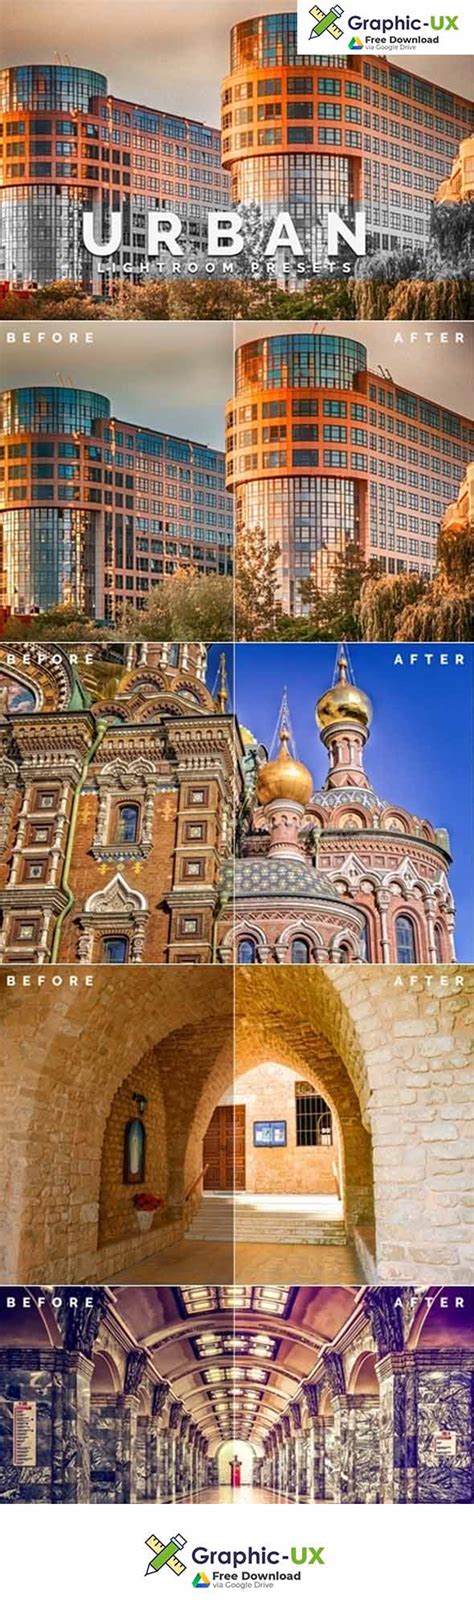 Lightroom presets for city shots will save your time and create perfect we advise all photographers to download urban lightroom presets for color correction. Urban Lightroom Presets free download - GraphicUX